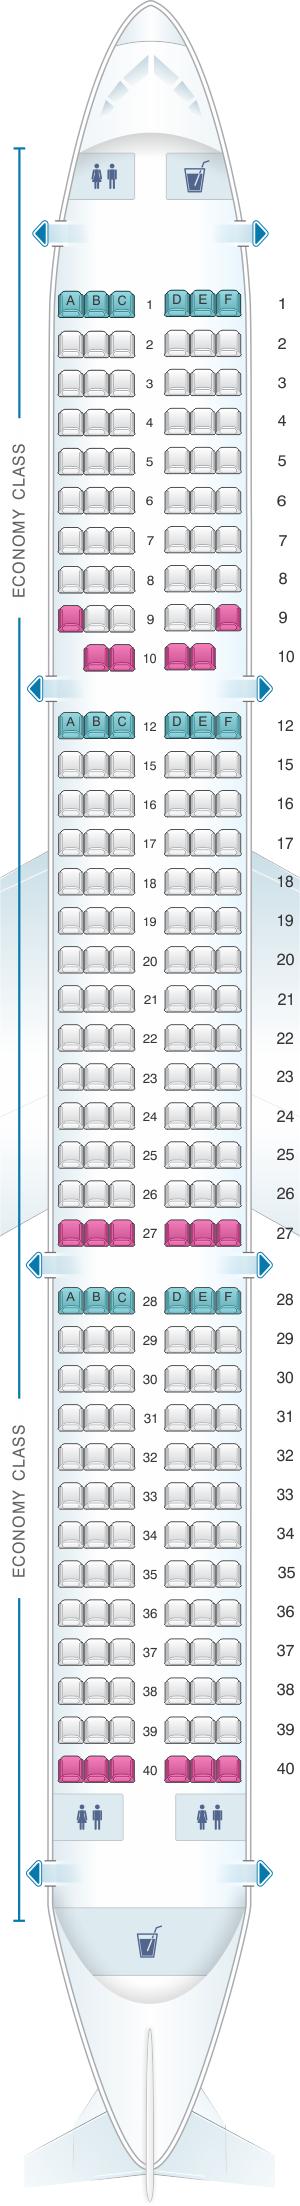 Seat map for Vueling Airbus A321